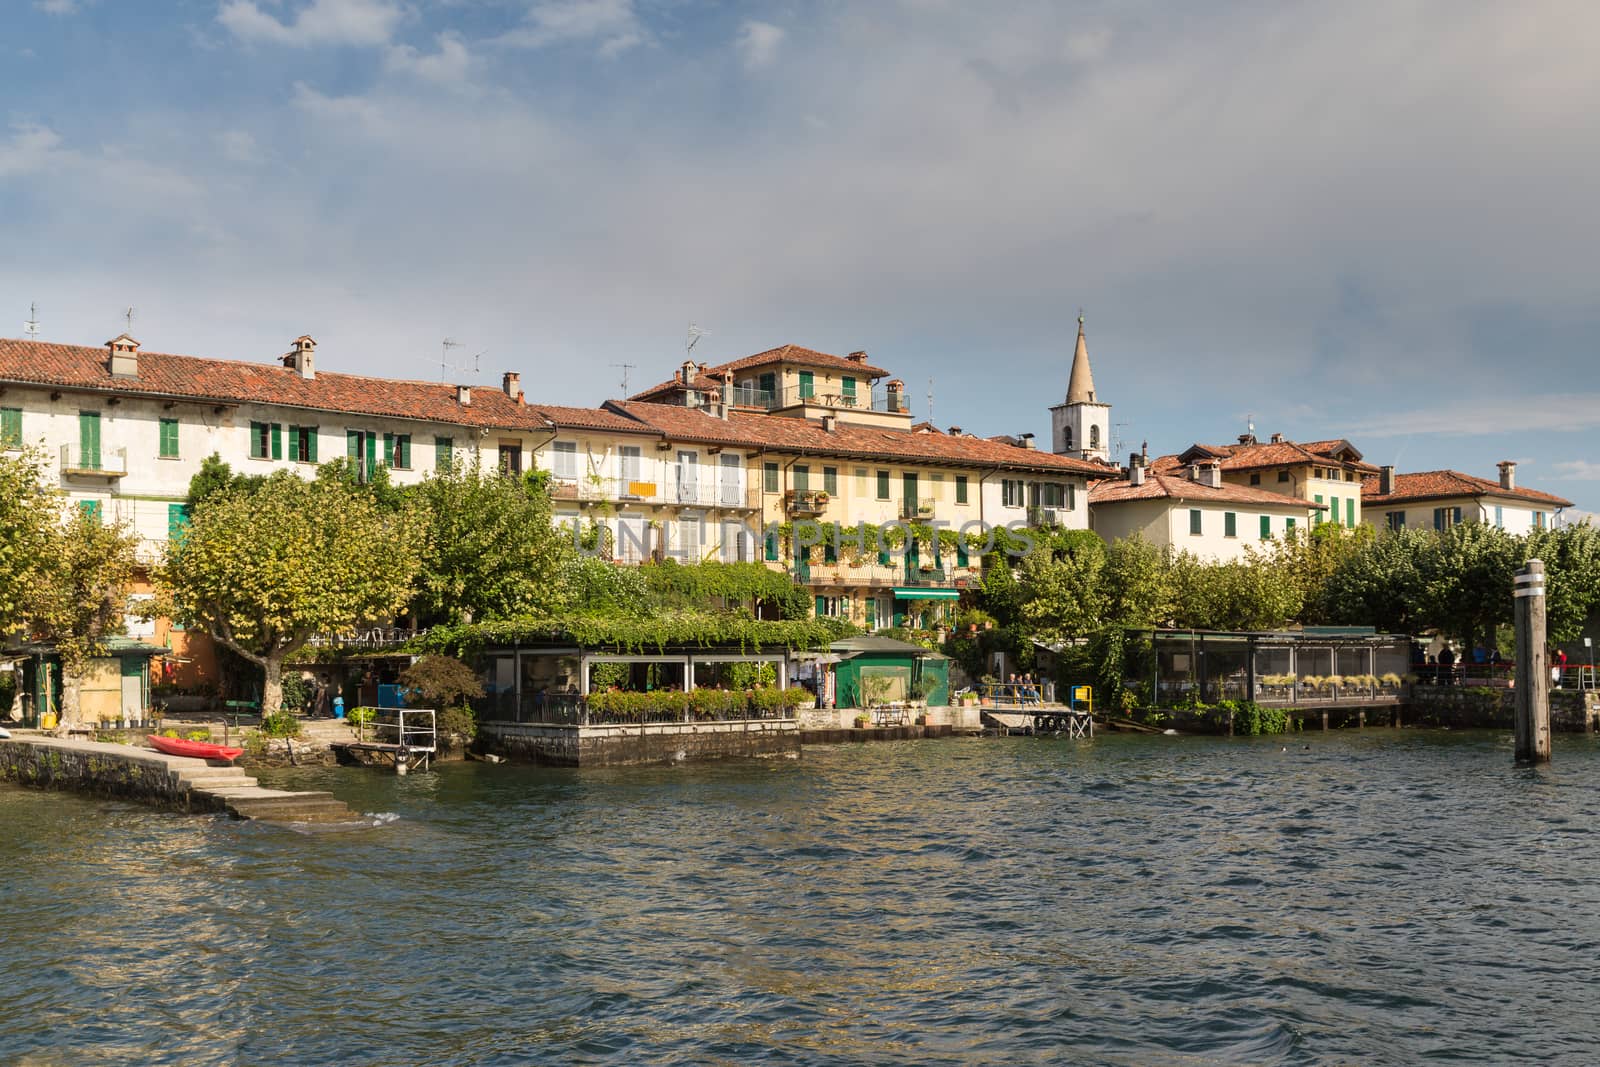 Isola dei Pescatori on Lake Maggiore near Stresa in Italy has an old fishing community and is still home to around fifty people